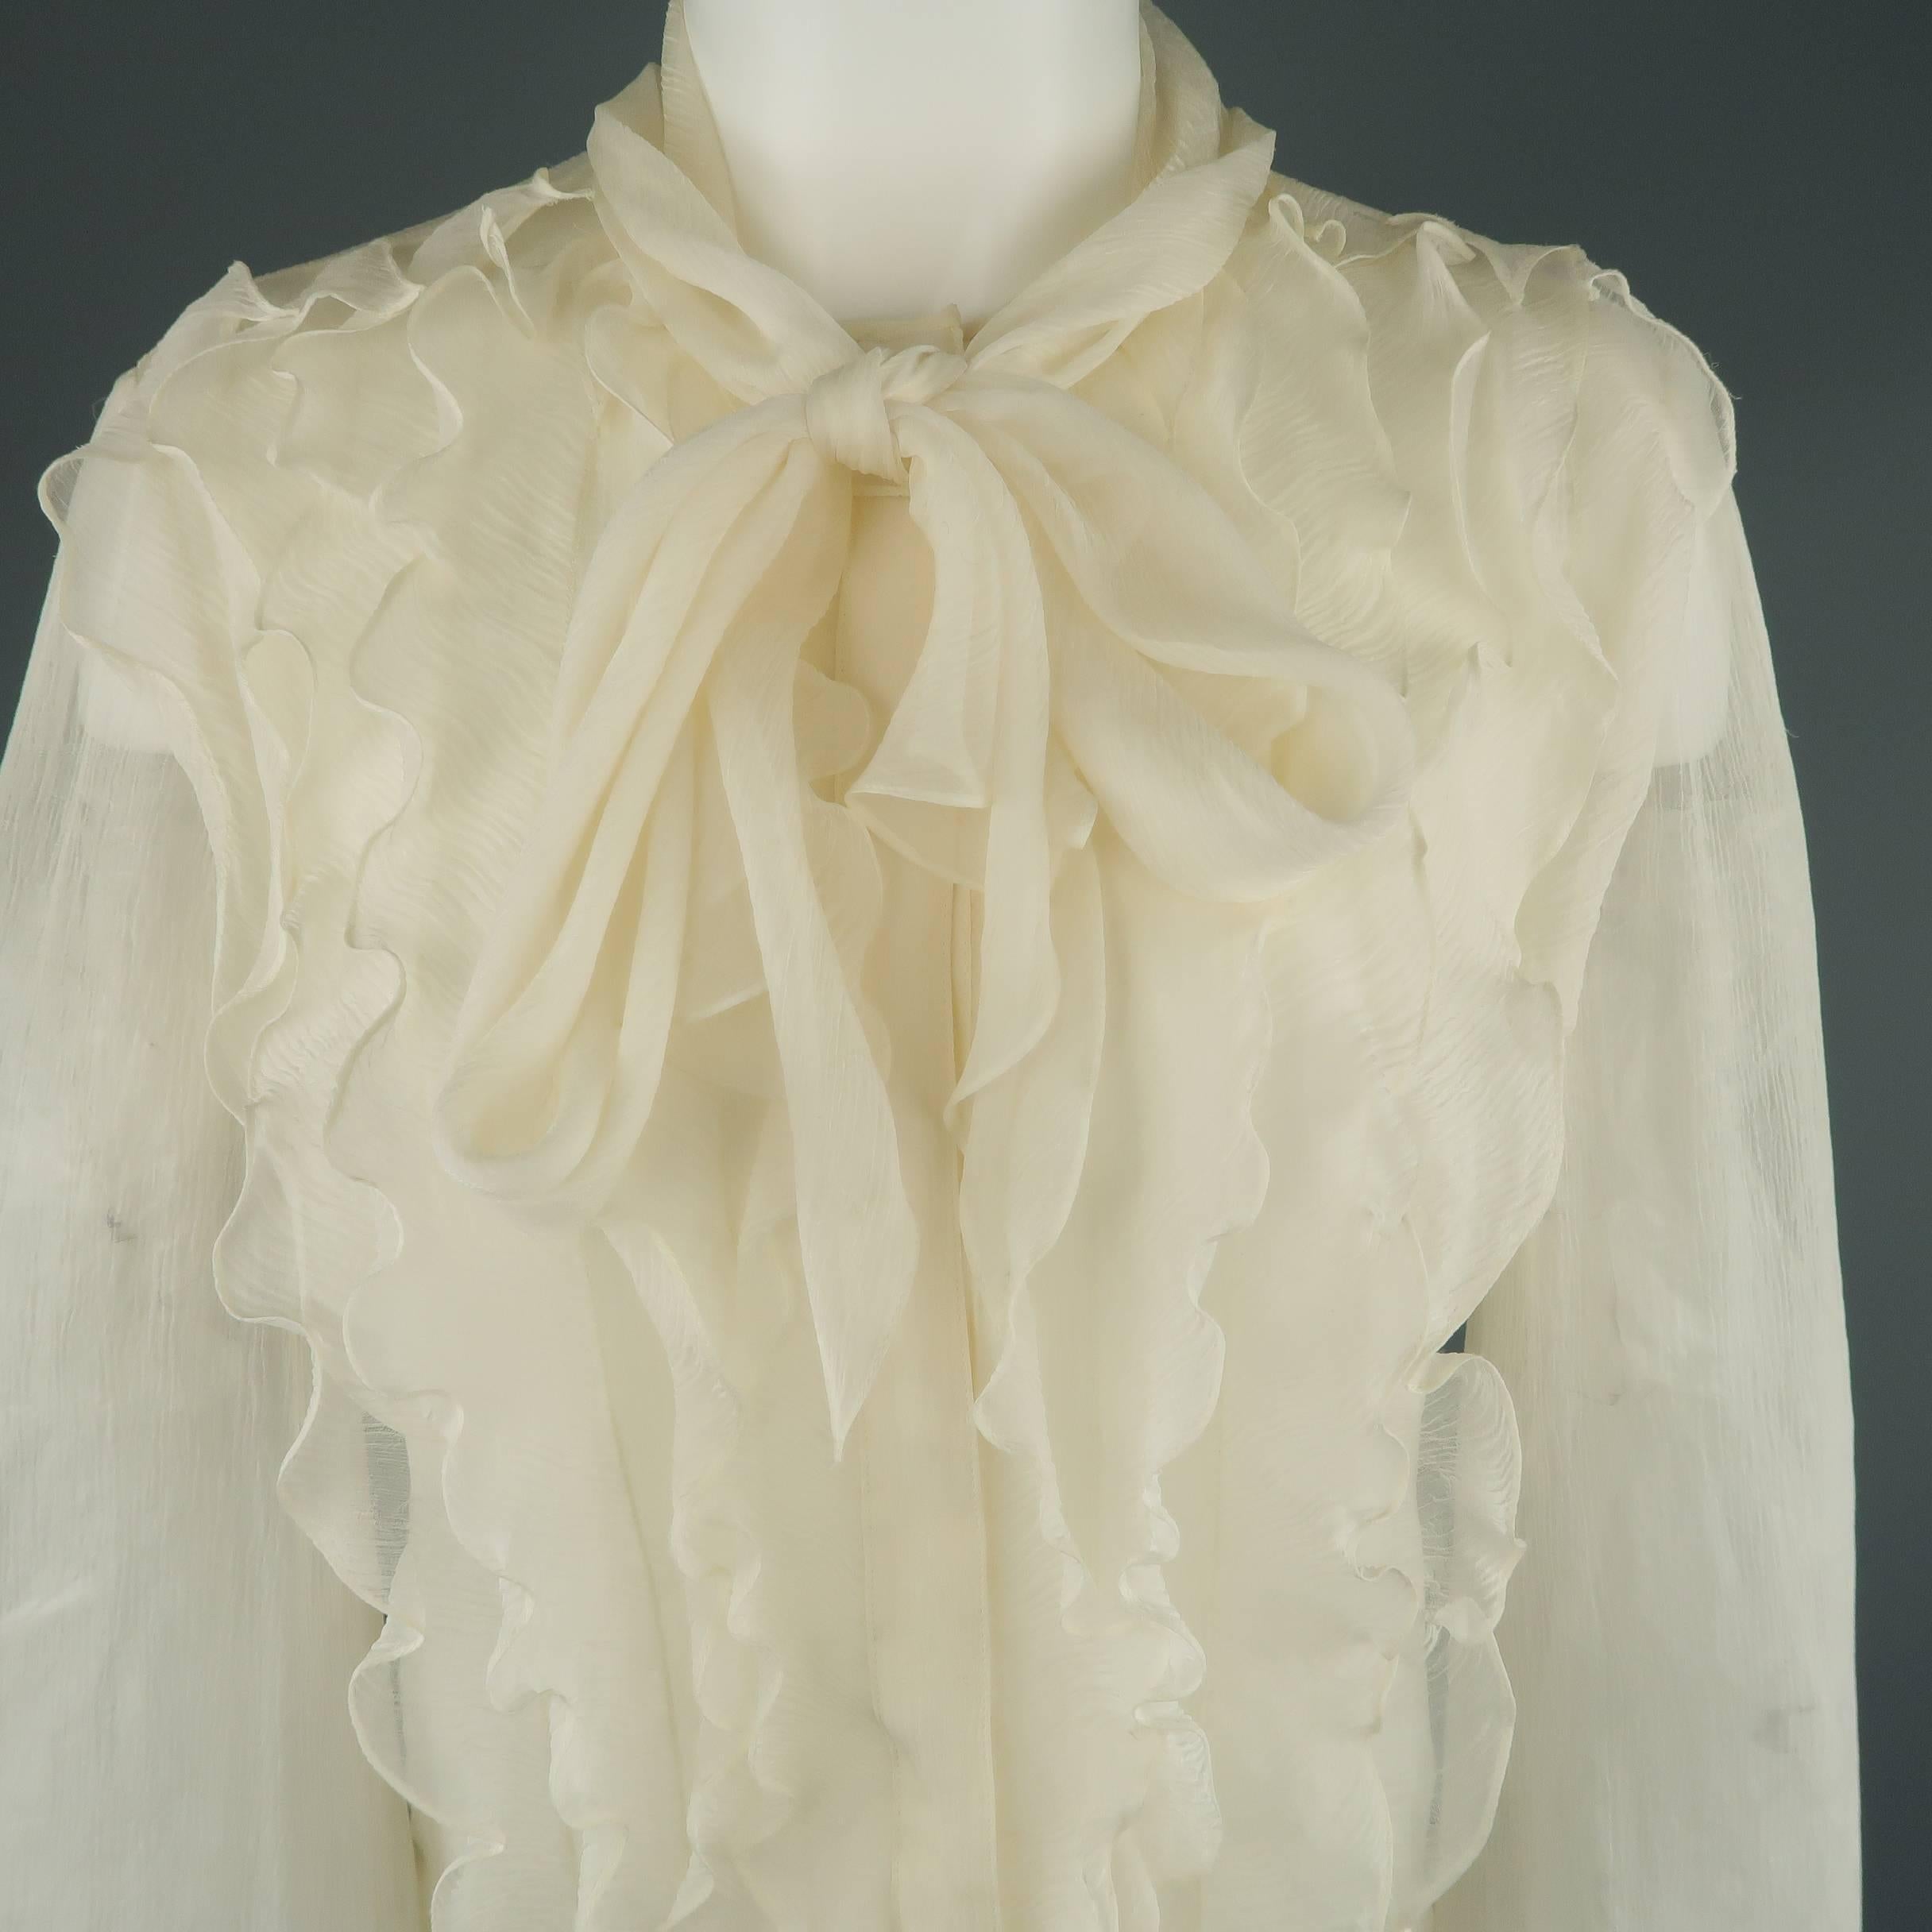 OSCAR DE LA RENTA blouse comes in light, creamy beige silk crepe chiffon with a subtle floral print, hidden placket snap closure, ruffled front, and tied collar. Minor wear. As-is. Made in USA.
 
Good Pre-Owned Condition.
Marked: 8
 
Measurements:
